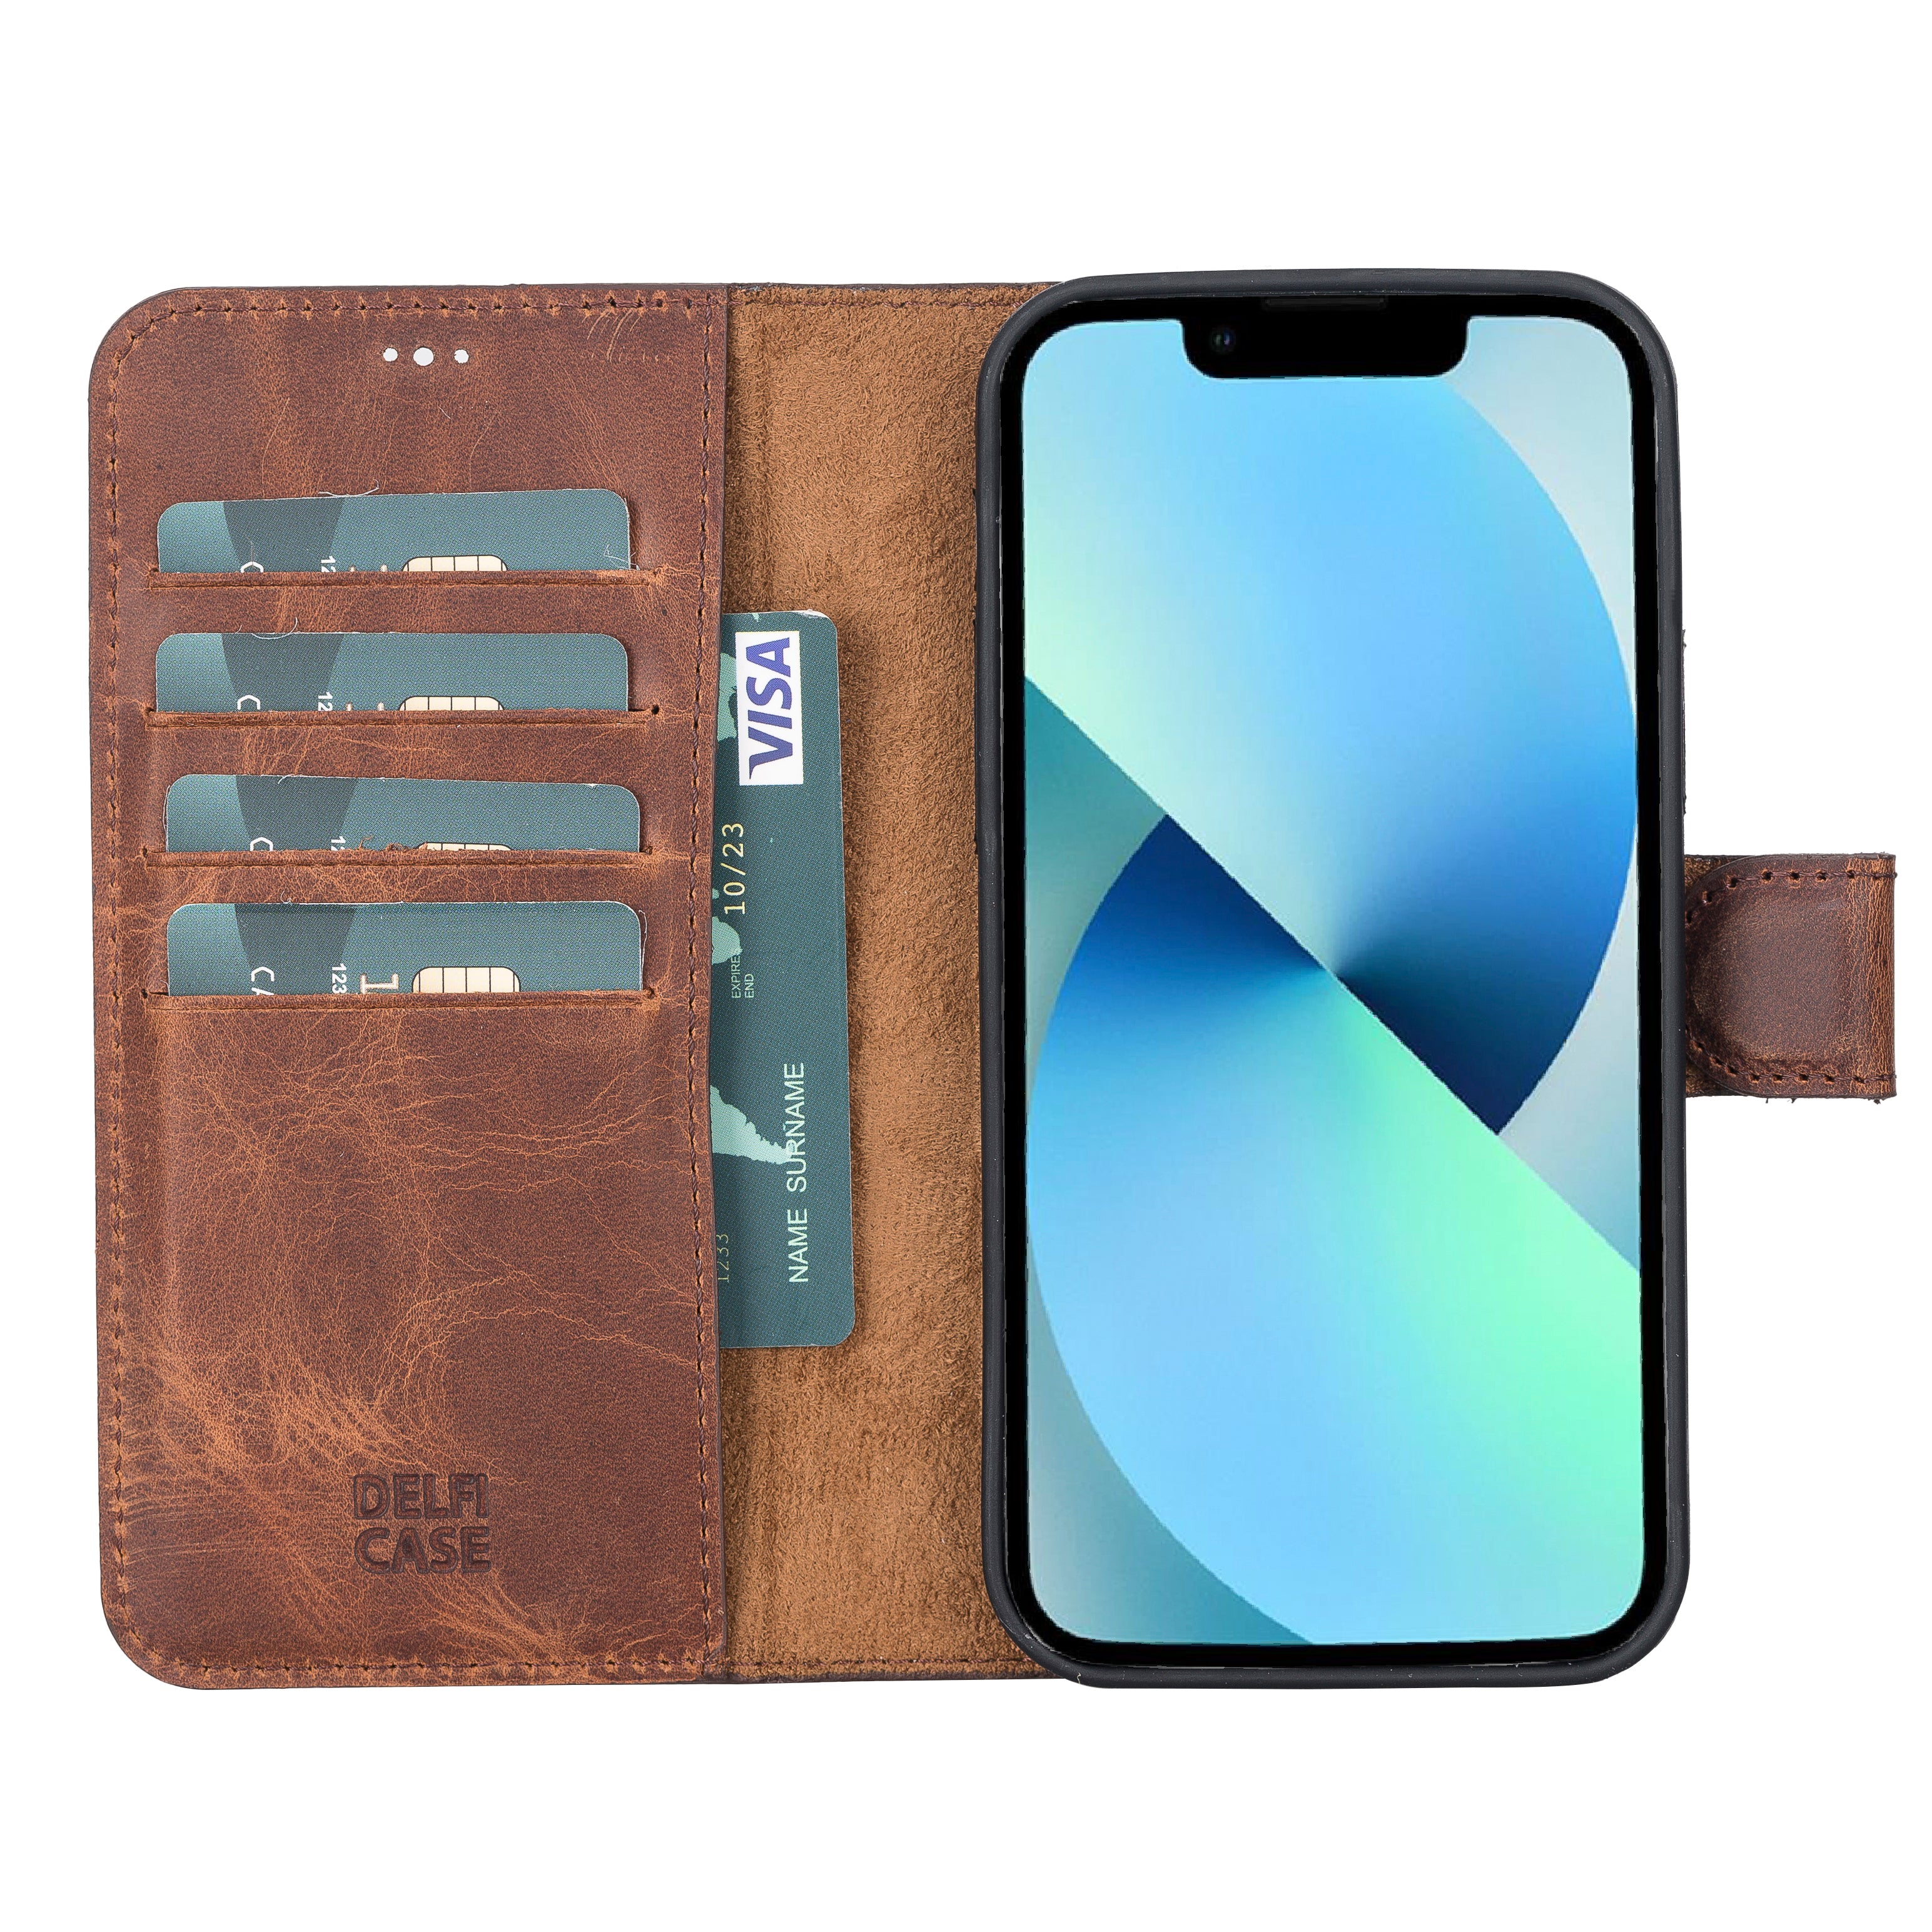 DelfiCase Magnetic Detachable Leather Wallet Case for iPhone 12 and iPhone 12 Pro (6.1") 22